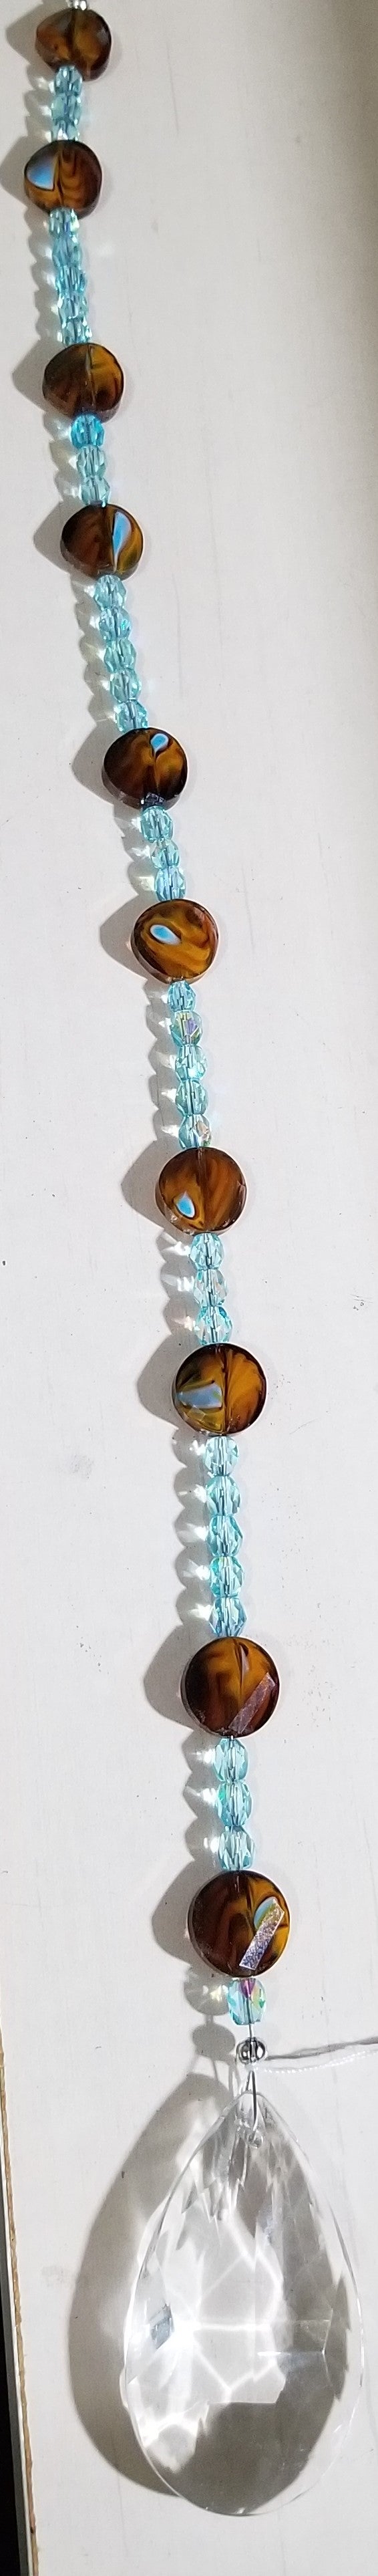 Beautiful Brown Beads with Teal Spots Suncatcher